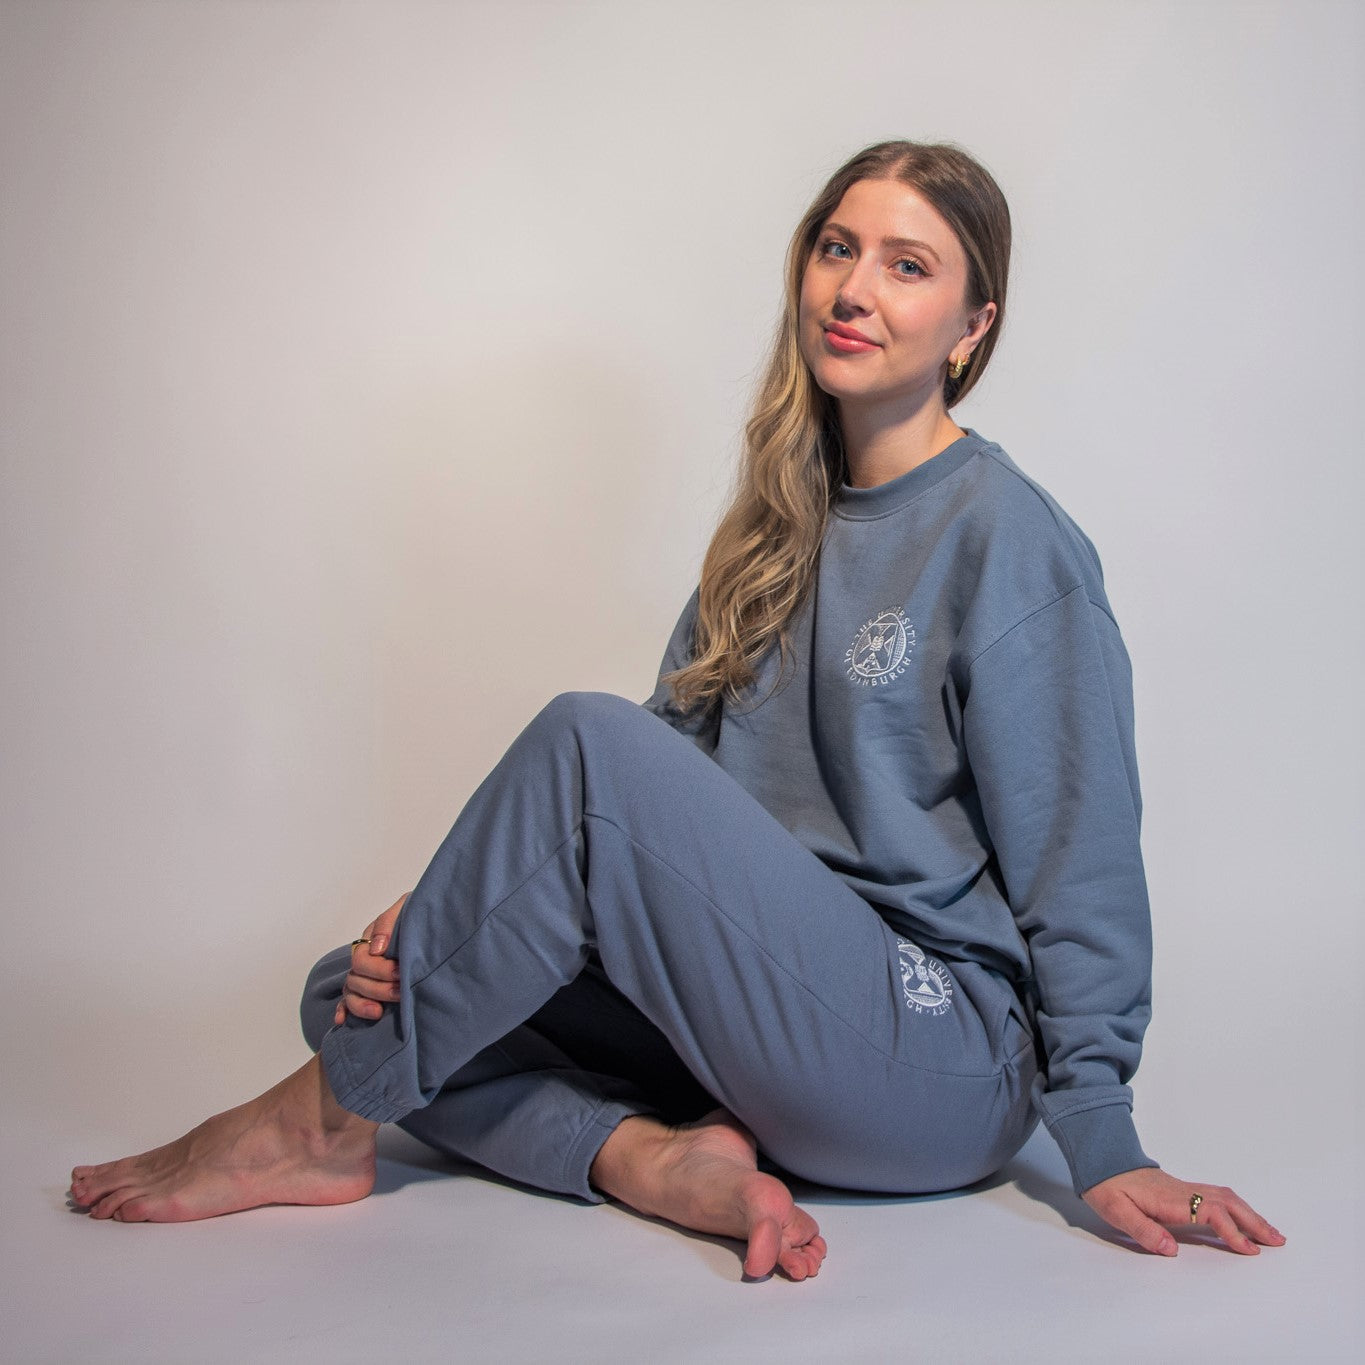 our model wears the embroidered sweatshirt and embroidered jogging bottoms in stone blue